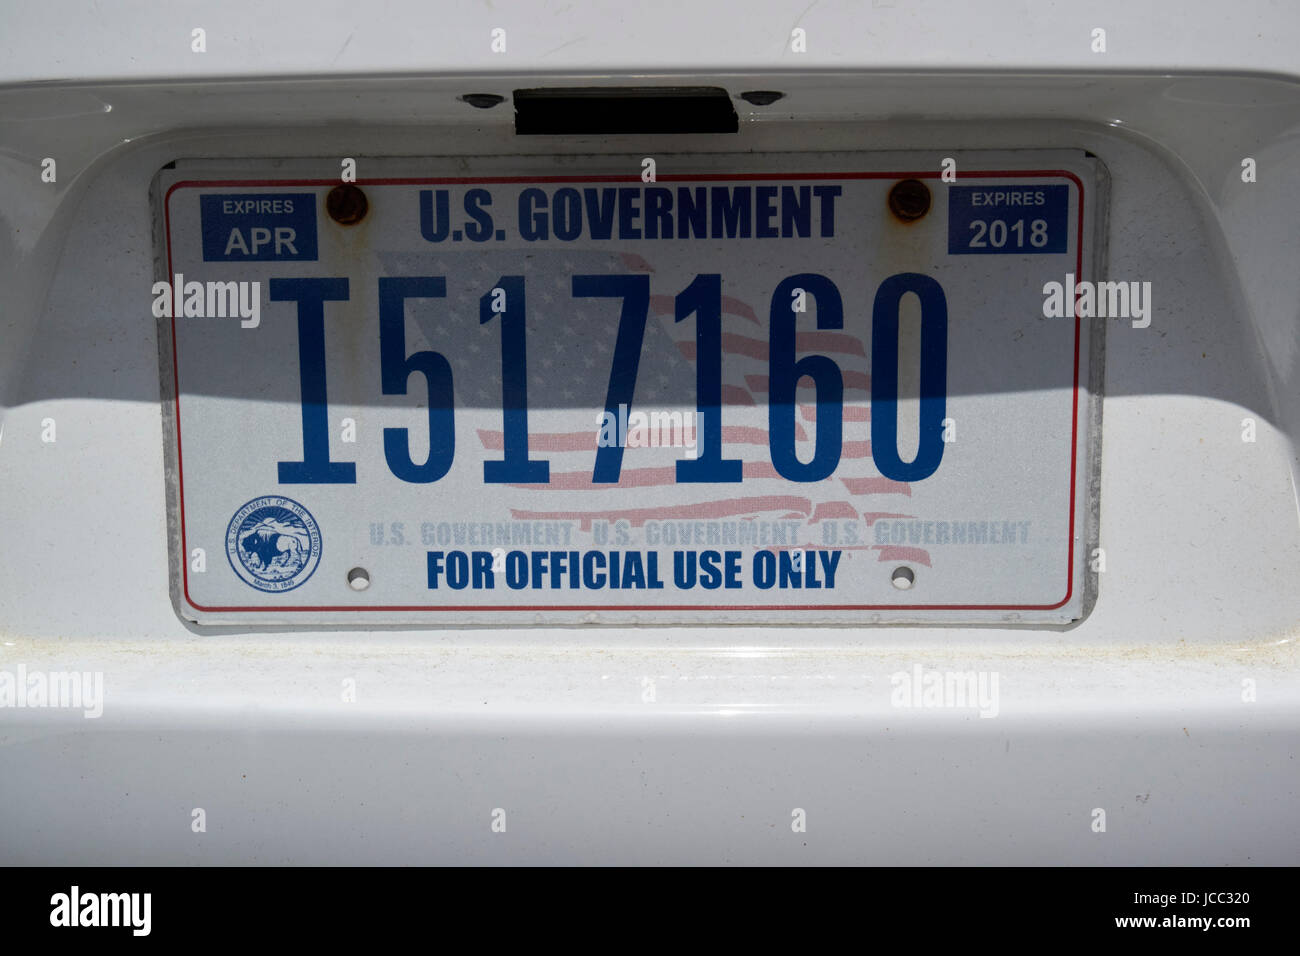 US government official use only license plate on official vehicle USA Stock Photo